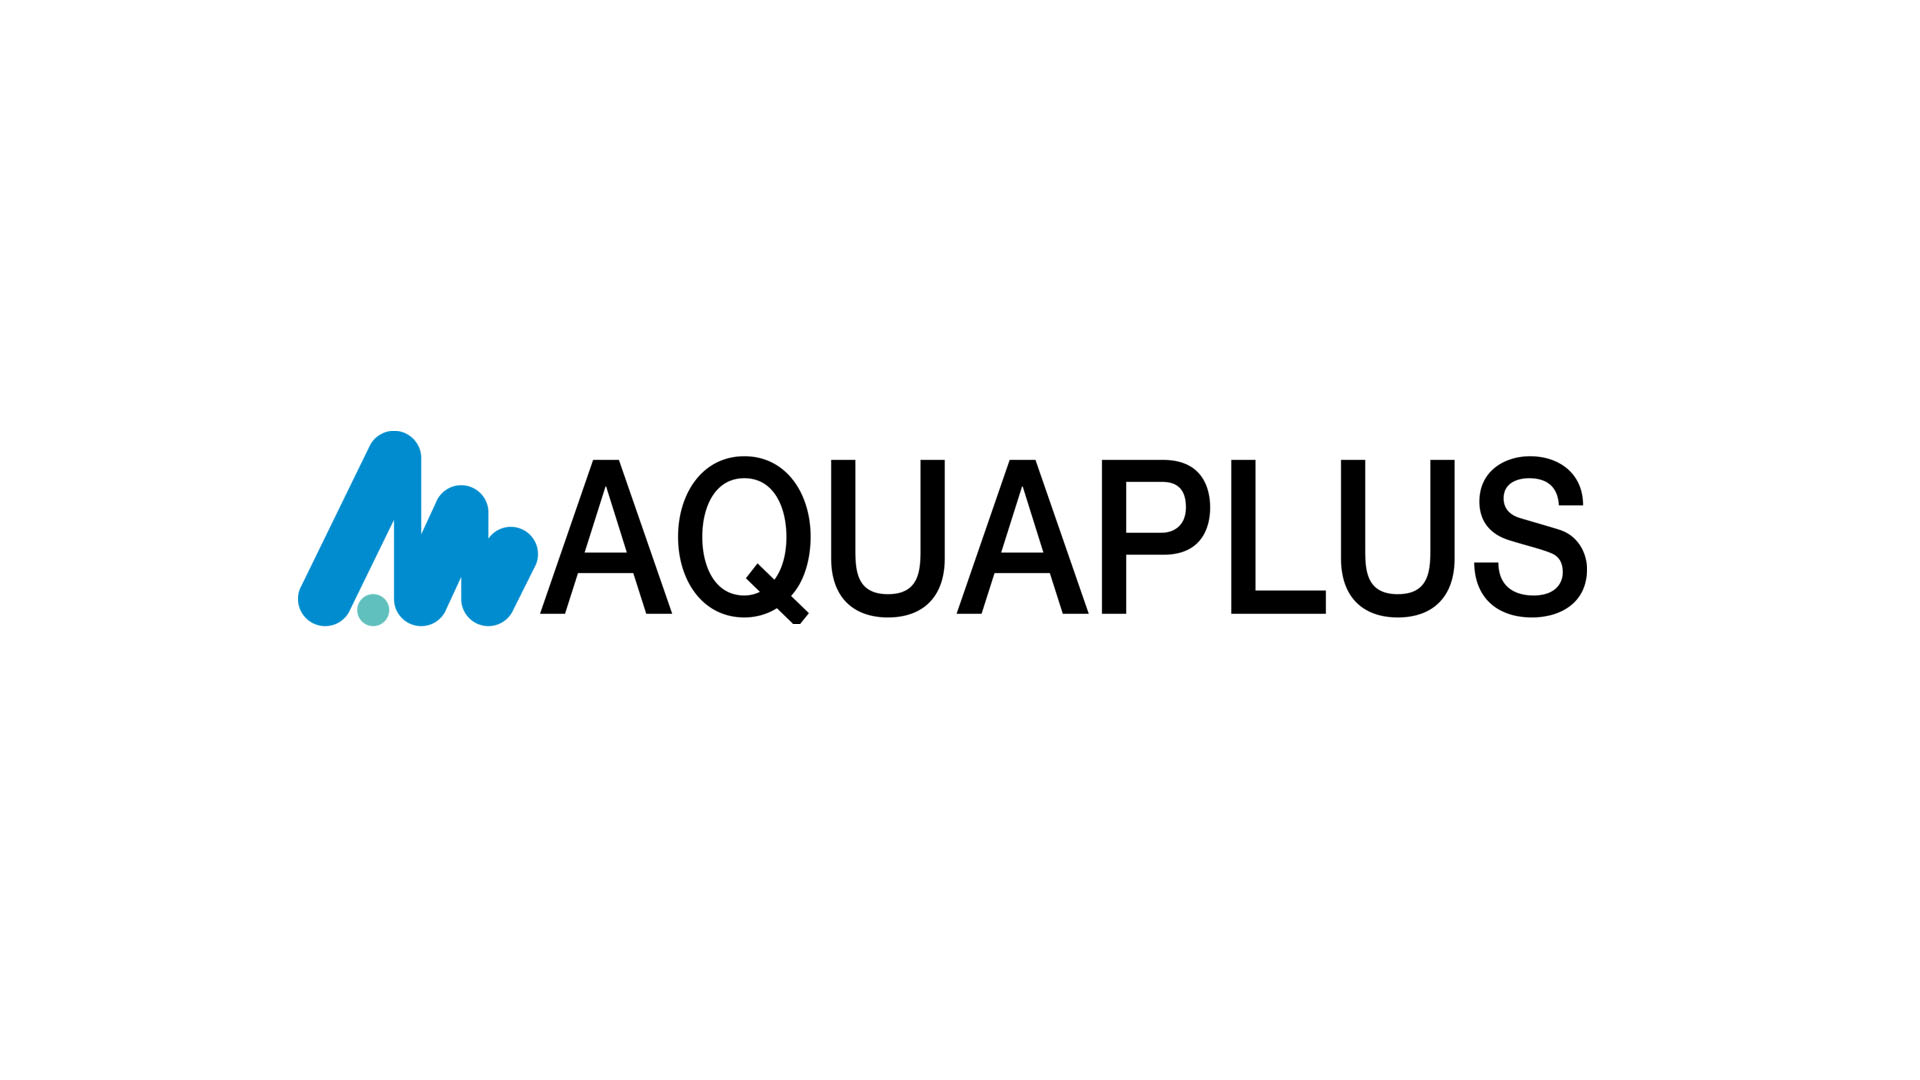 Aquaplus has appointed a new CEO